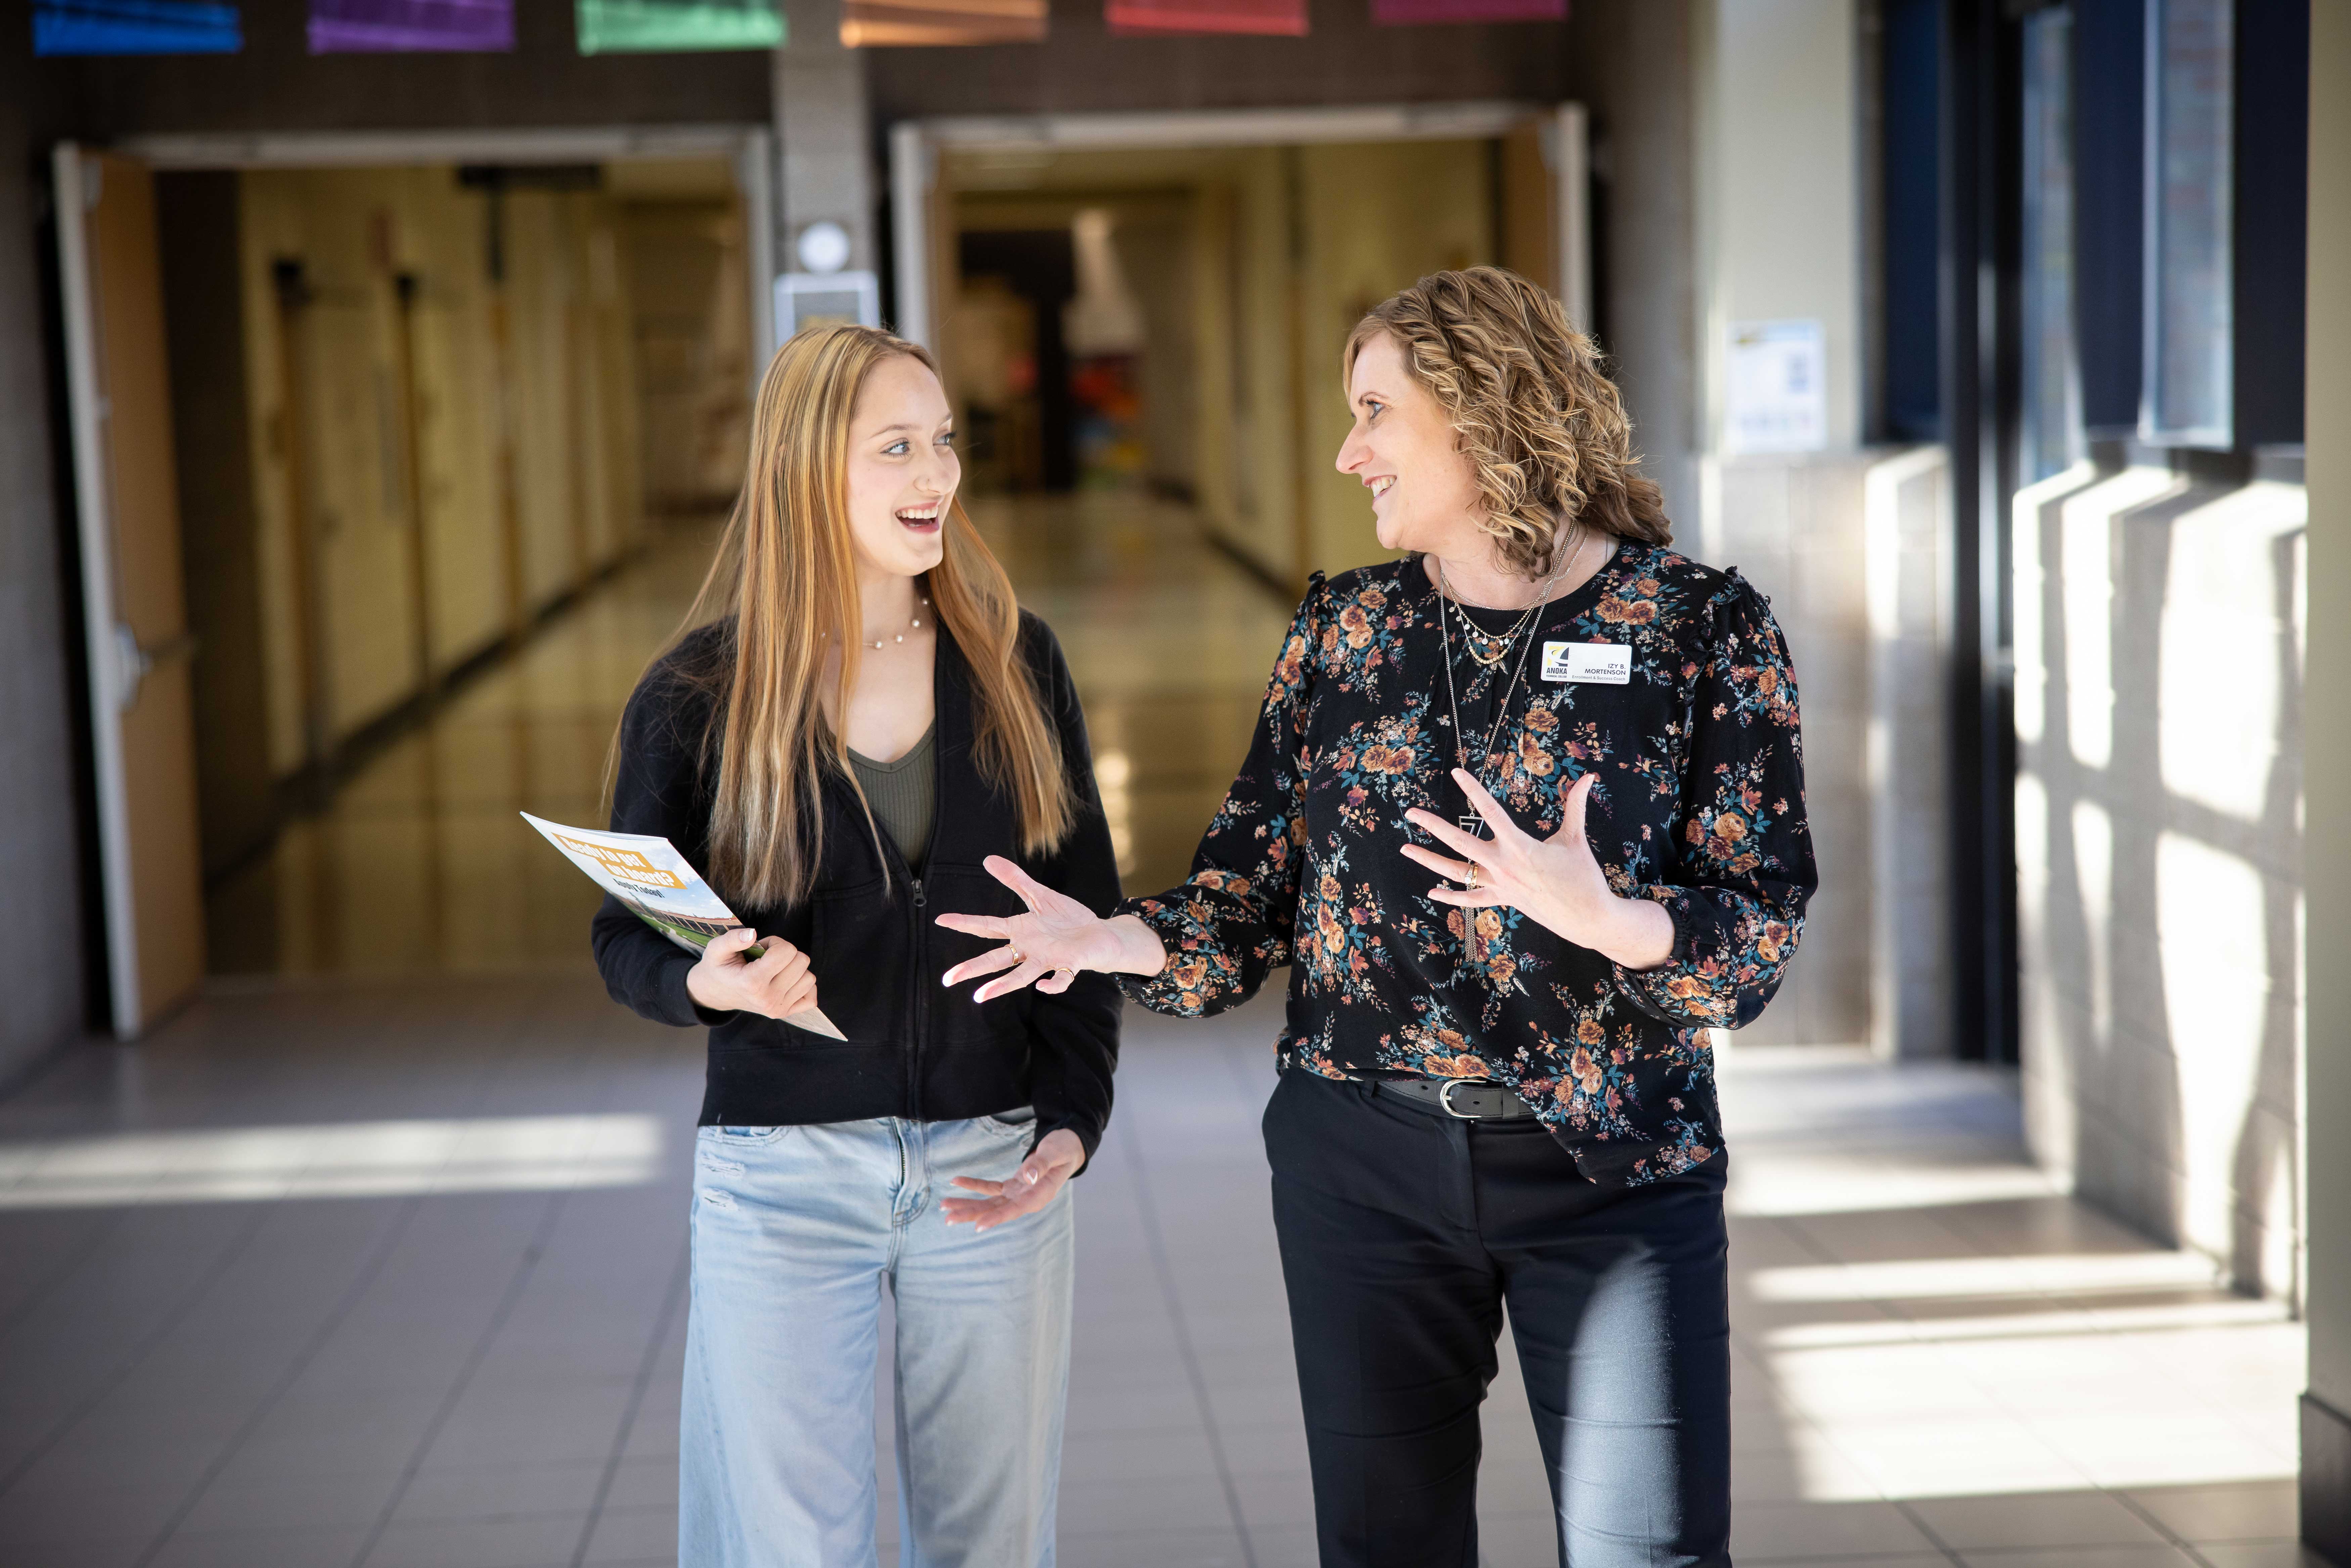 Two individuals engaged in a conversation while walking through a brightly lit school hallway. One person holds a pamphlet, and both are gesturing as they talk, indicating an animated discussion.